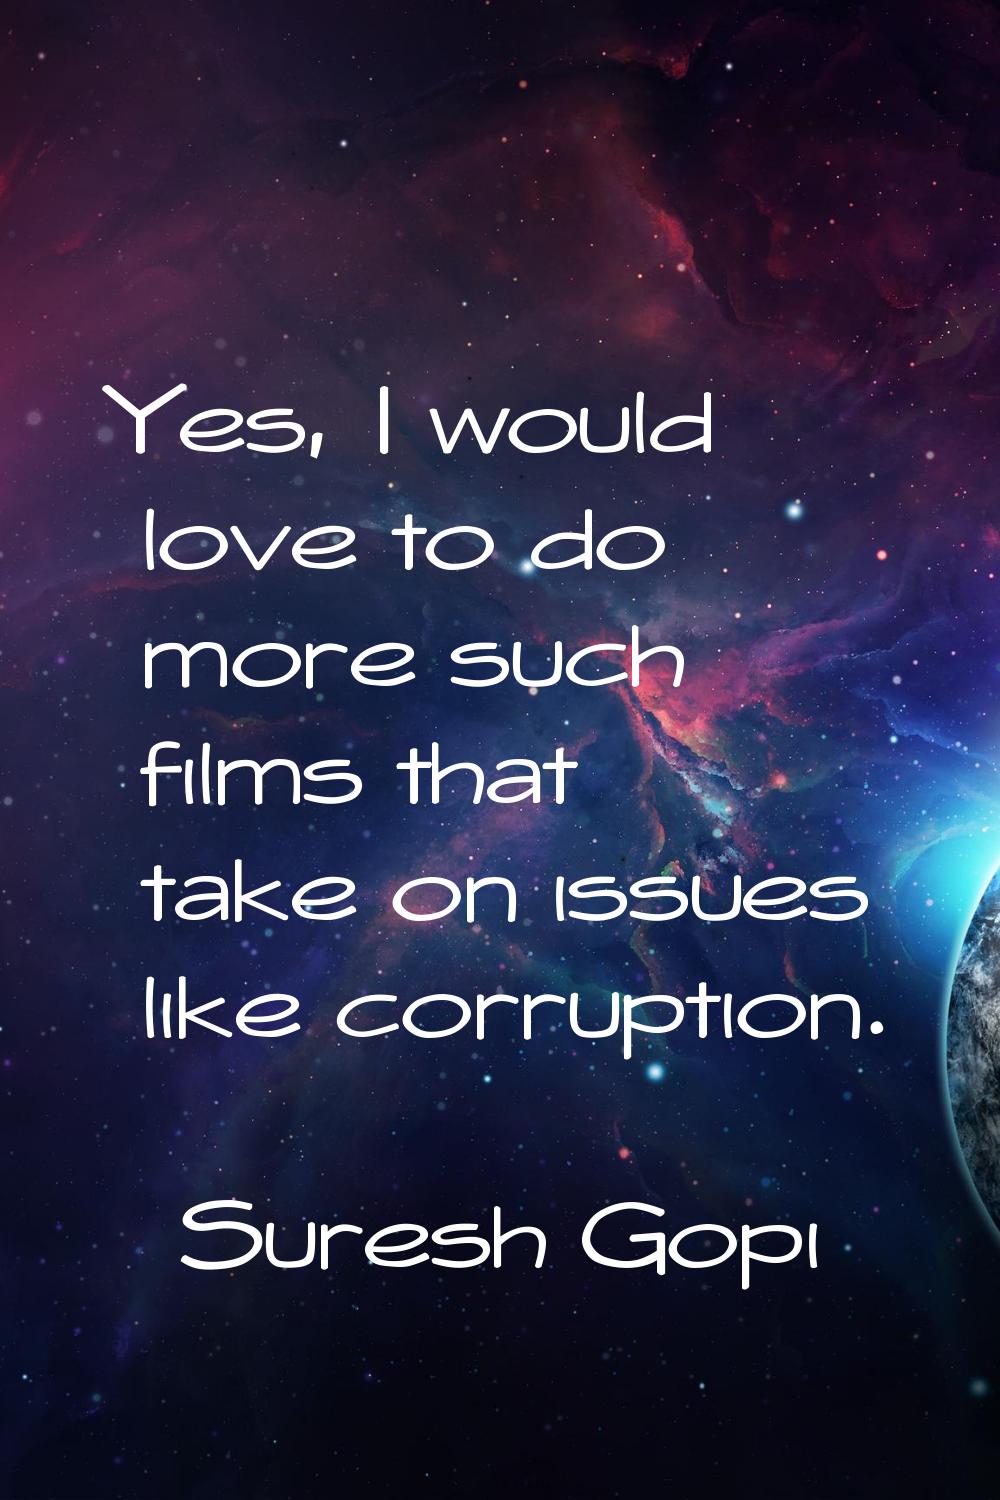 Yes, I would love to do more such films that take on issues like corruption.